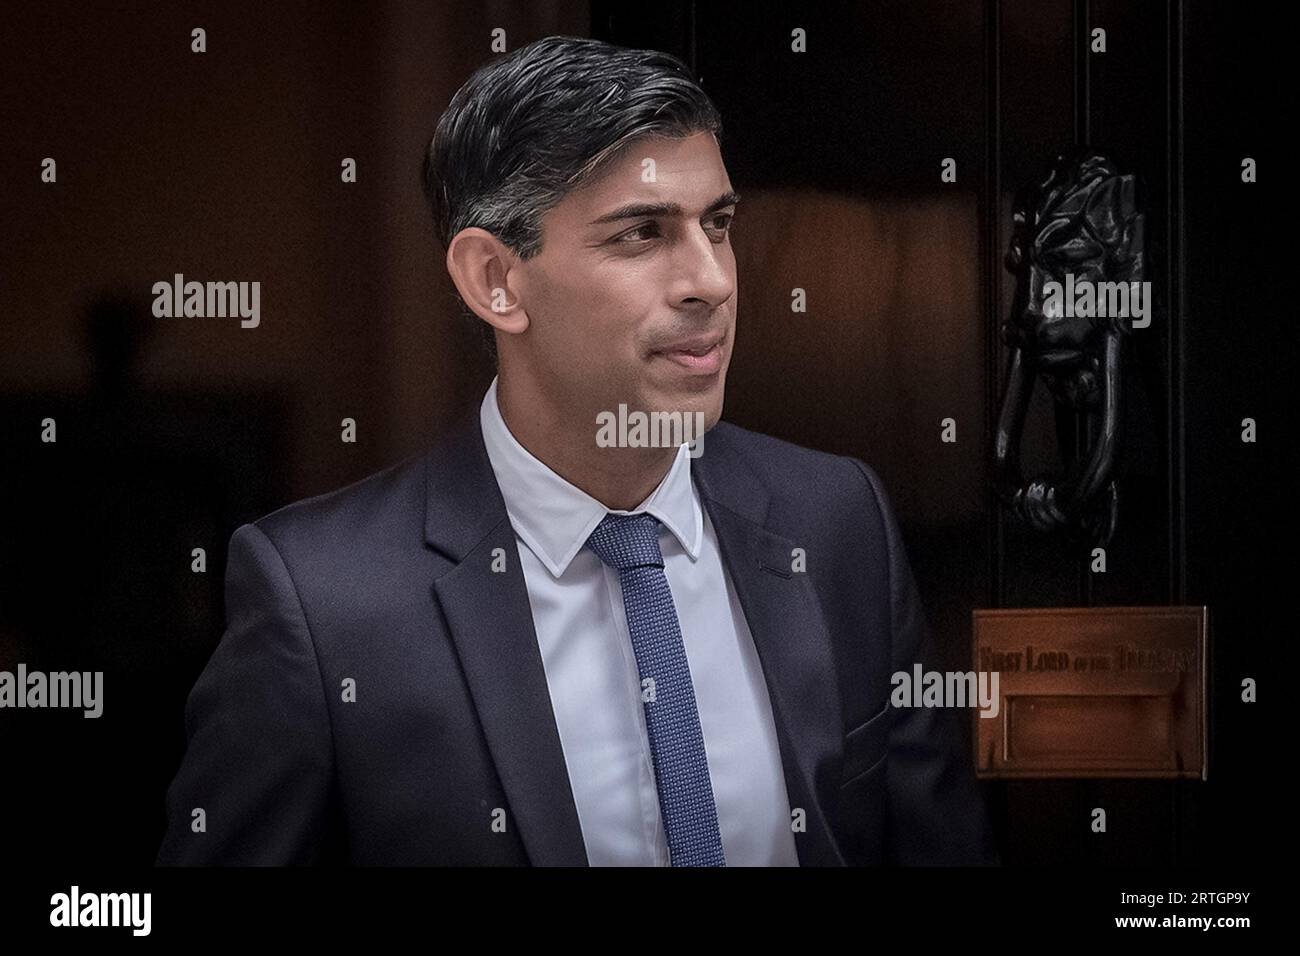 London, UK. 13th September 2023. Prime Minister Rishi Sunak leaves No.10 Downing Street for weekly questions in Parliament to include raising a motion to include the Russian paramilitary group Wagner on the UK’s list of terrorist organizations. Credit: Guy Corbishley/Alamy Live News Stock Photo